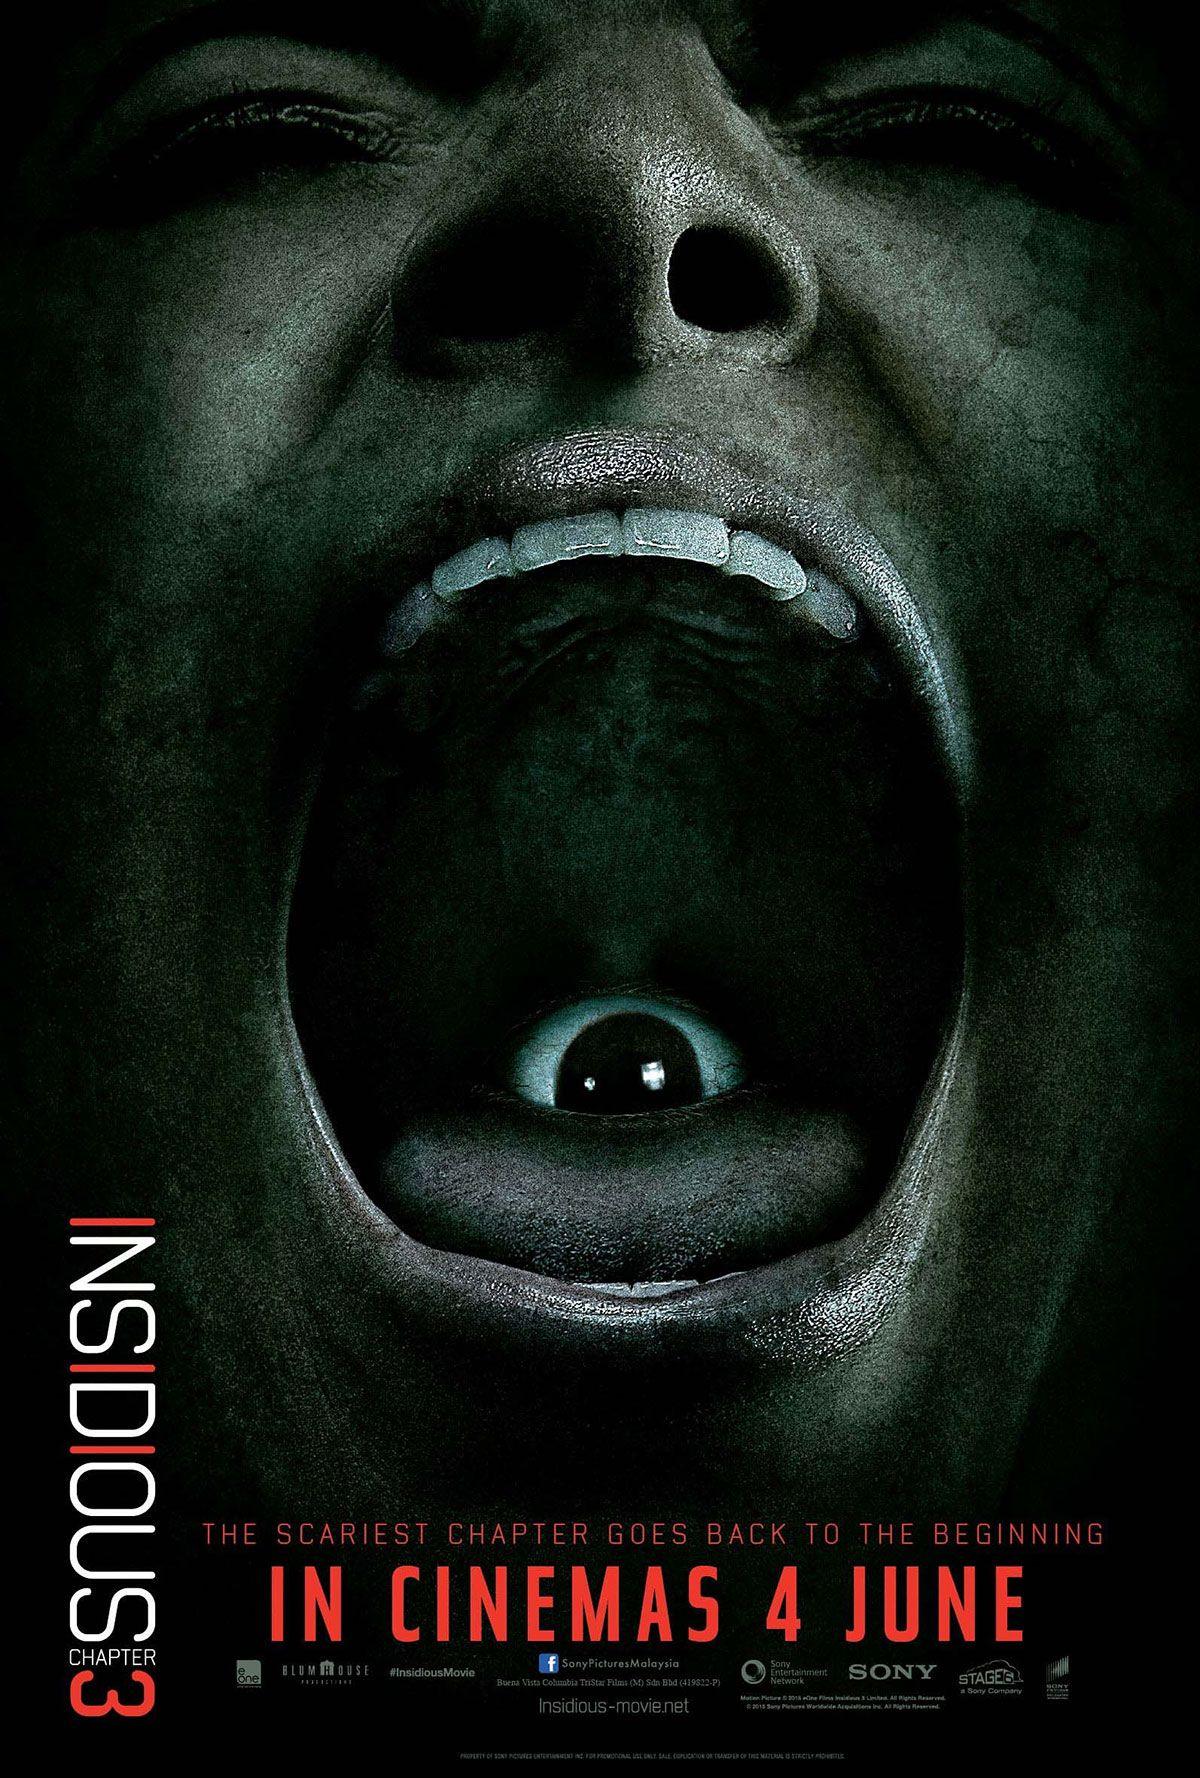 Insidious Chapter Wallpapers